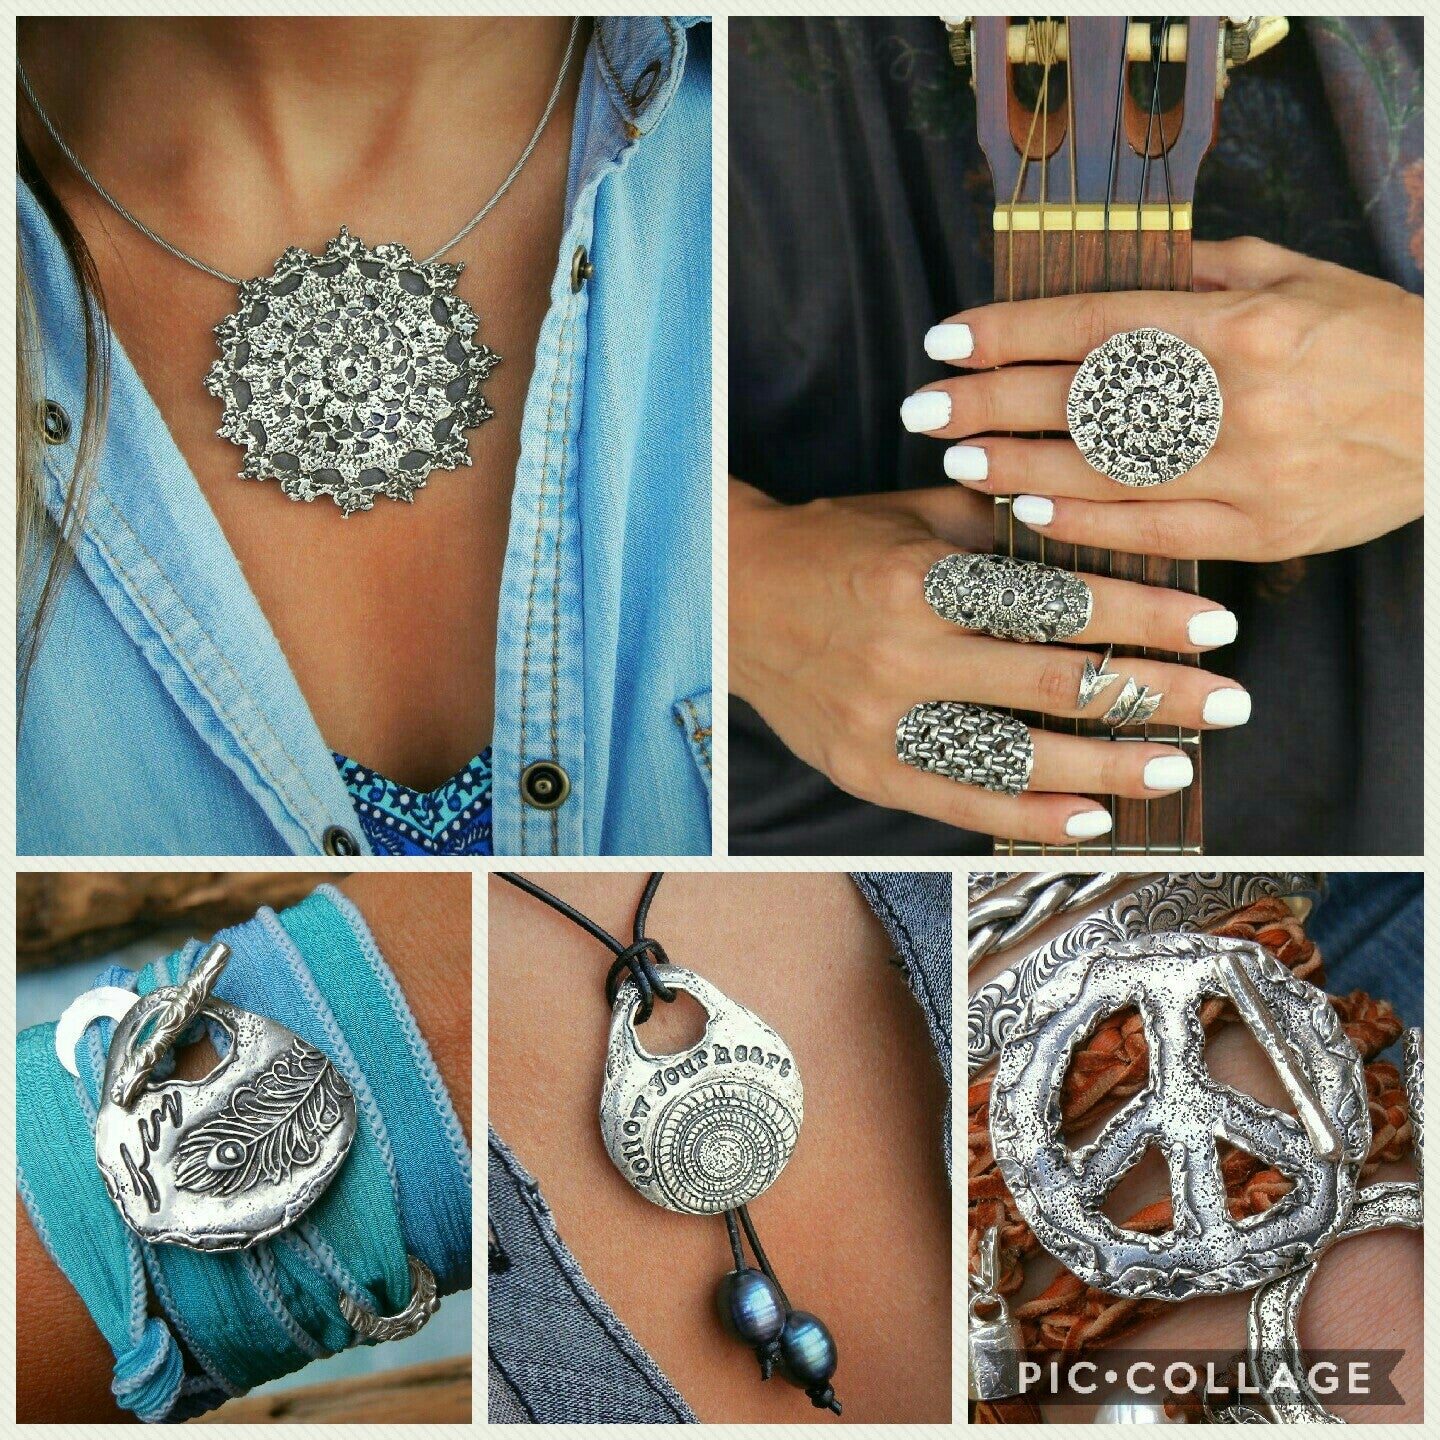 Crochet Silver Ring - HappyGoLicky Jewelry